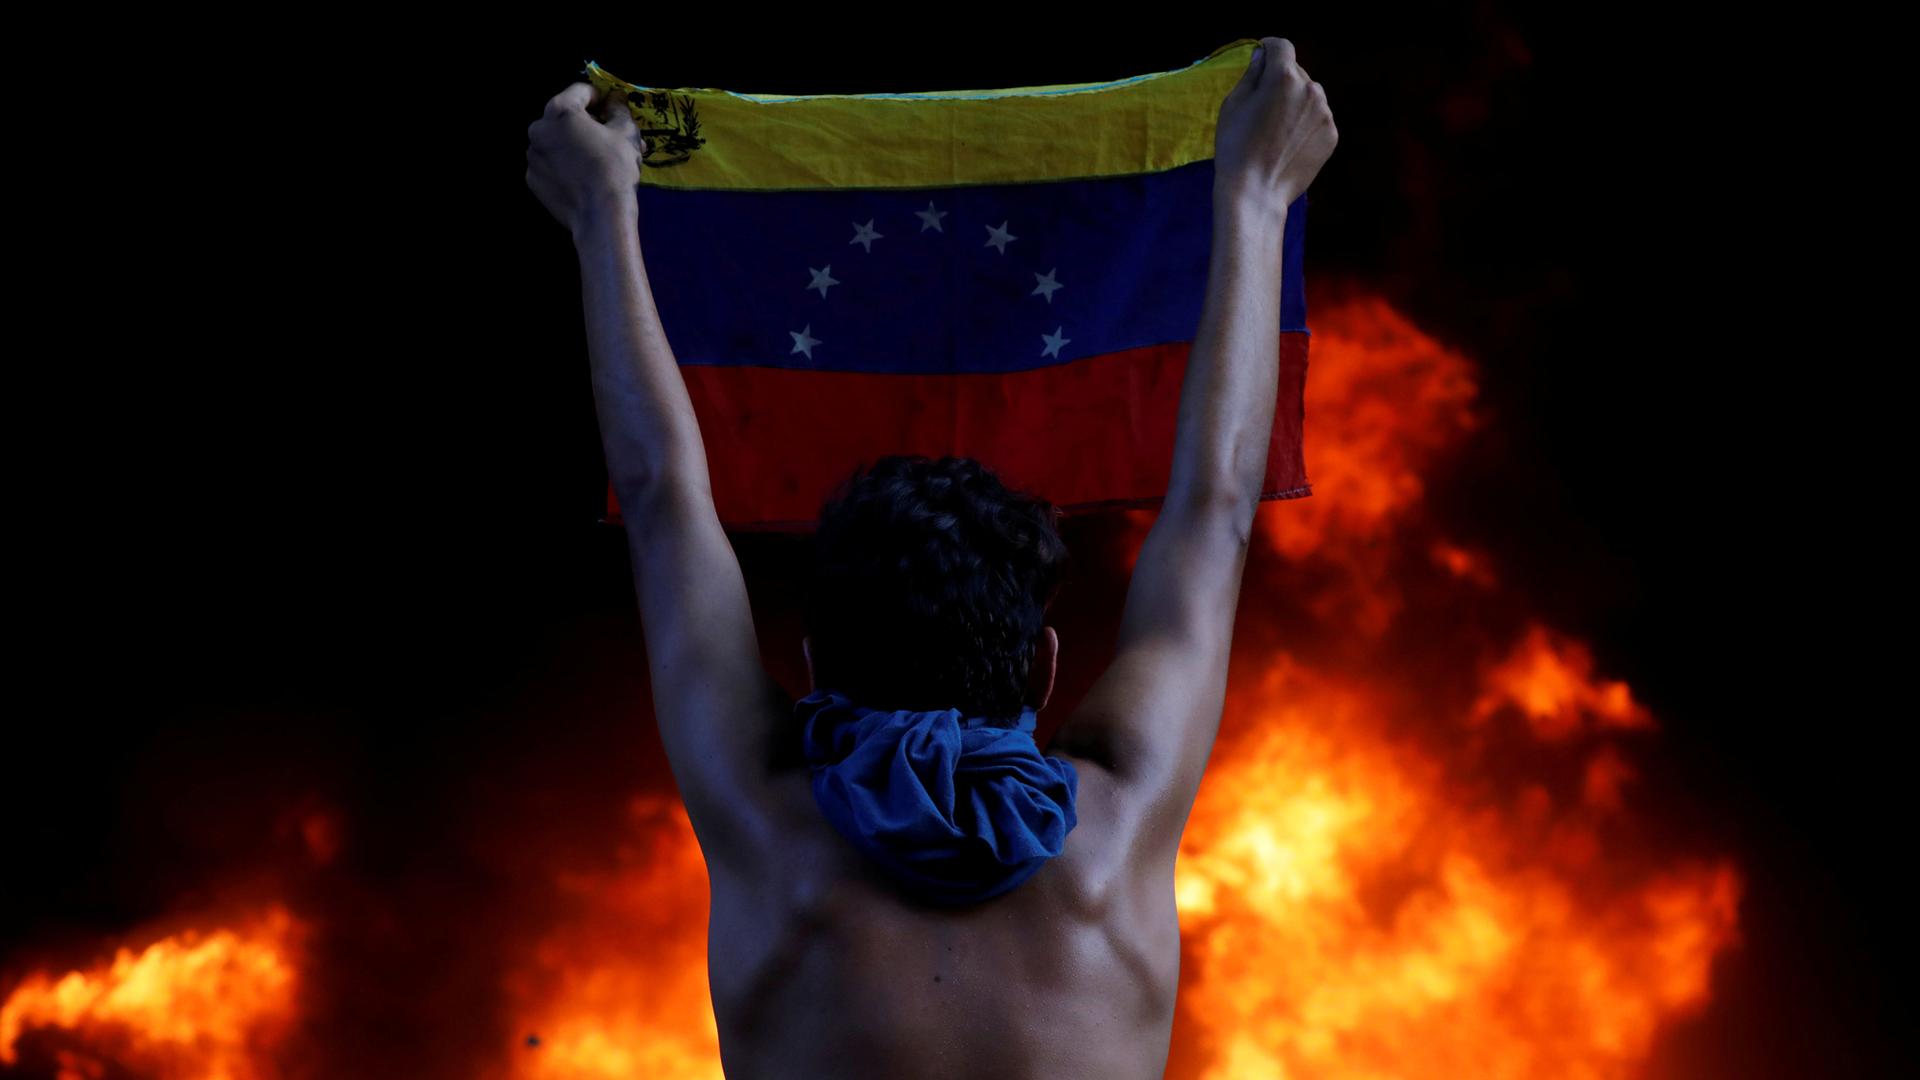 A protester holds a national flag while standing in front of a fire burning at the entrance of a building housing the magistracy of the Supreme Court of Justice, during a rally against Venezuela's President Nicolas Maduro, in Caracas, Venezuela, June 12, 